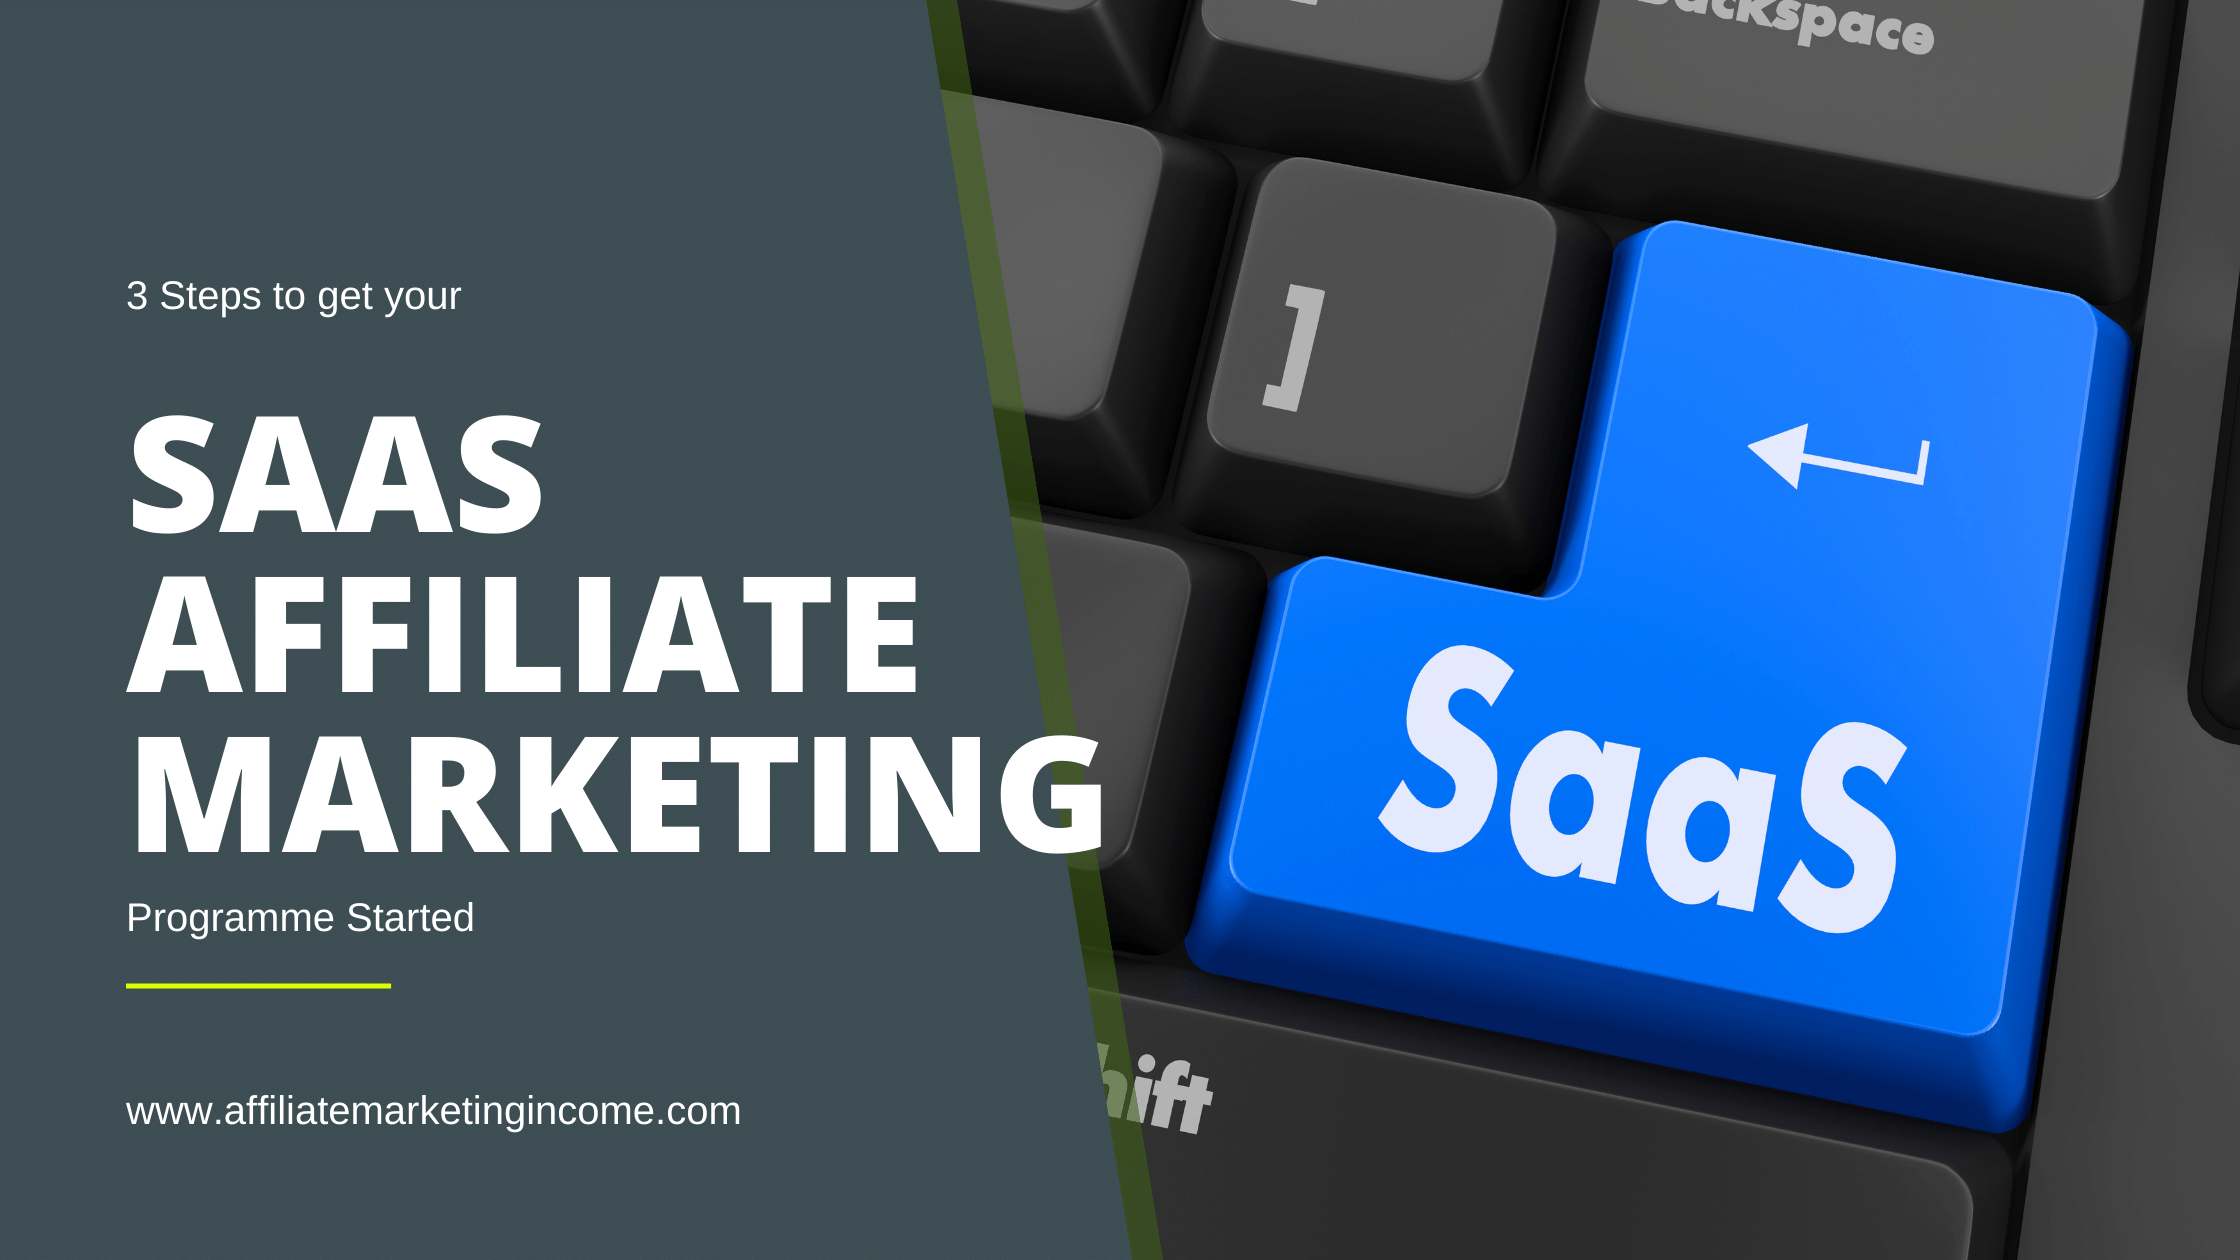 How to get SaaS affiliate marketing started